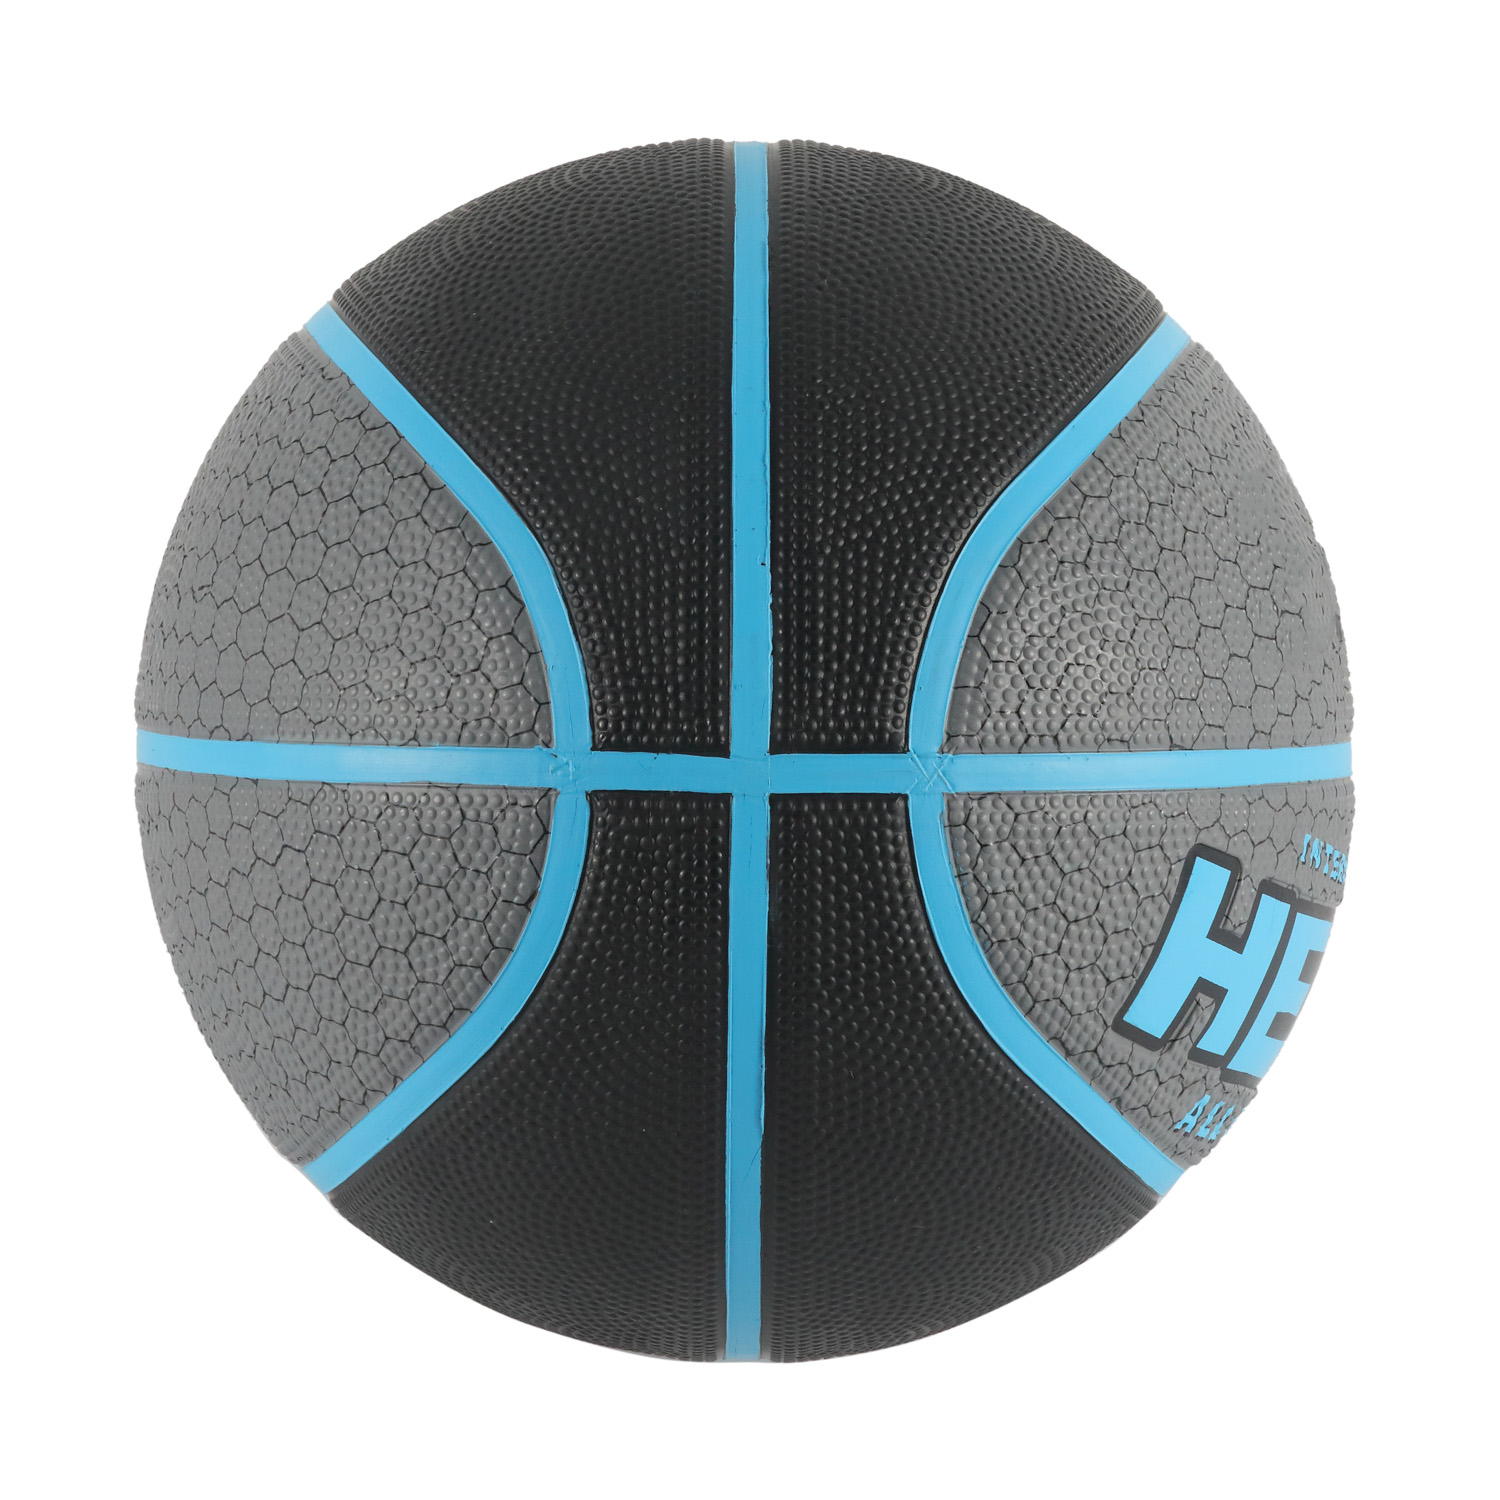 Official Size Laminated Basketball in Brown PVC Cover